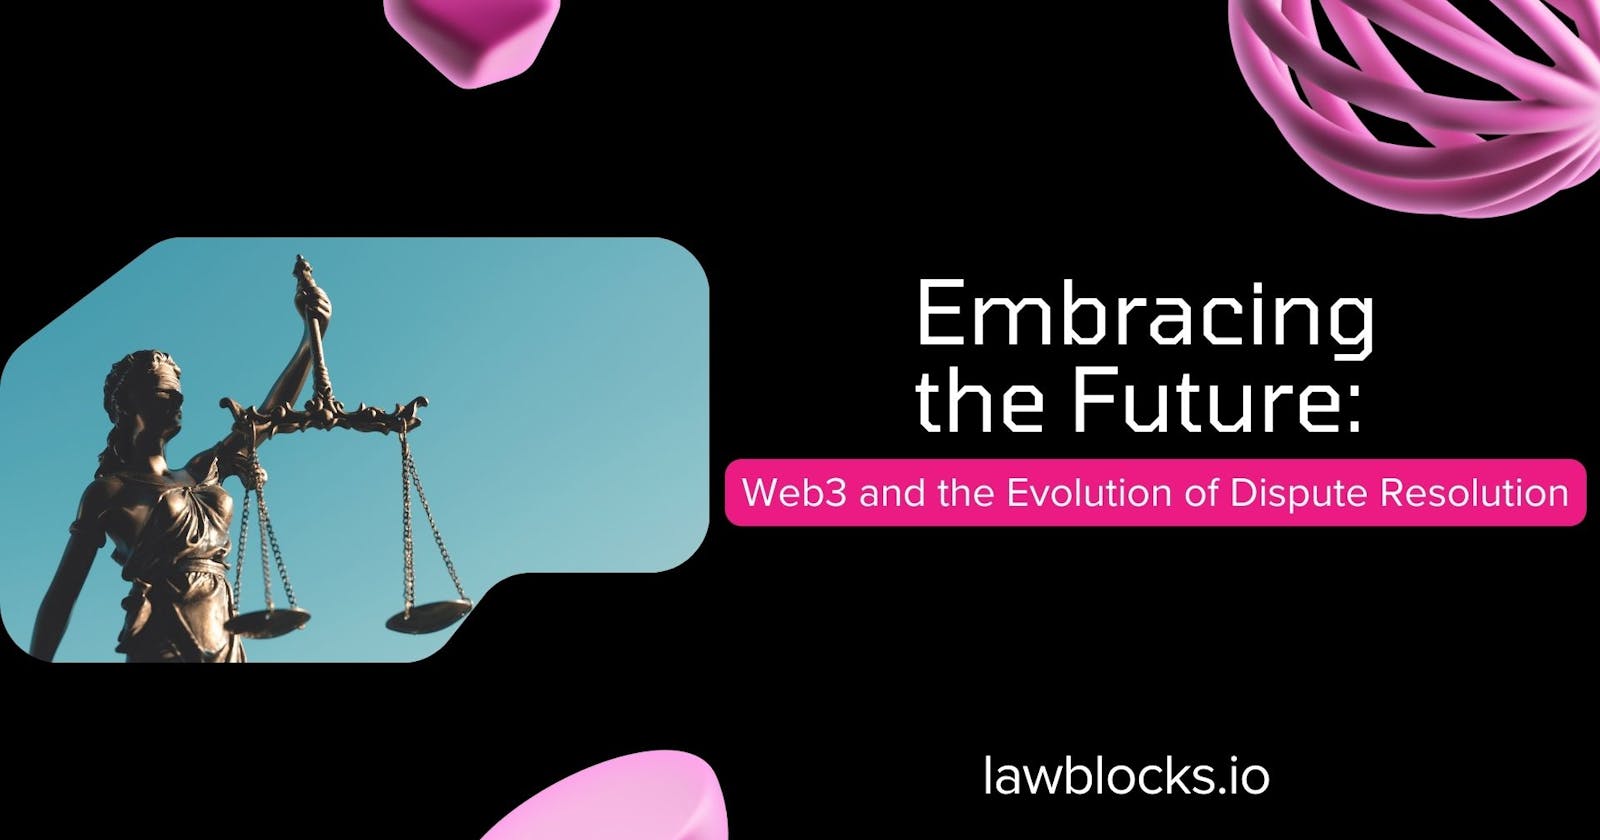 Embracing the Future: Web3 and the Evolution of Dispute Resolution